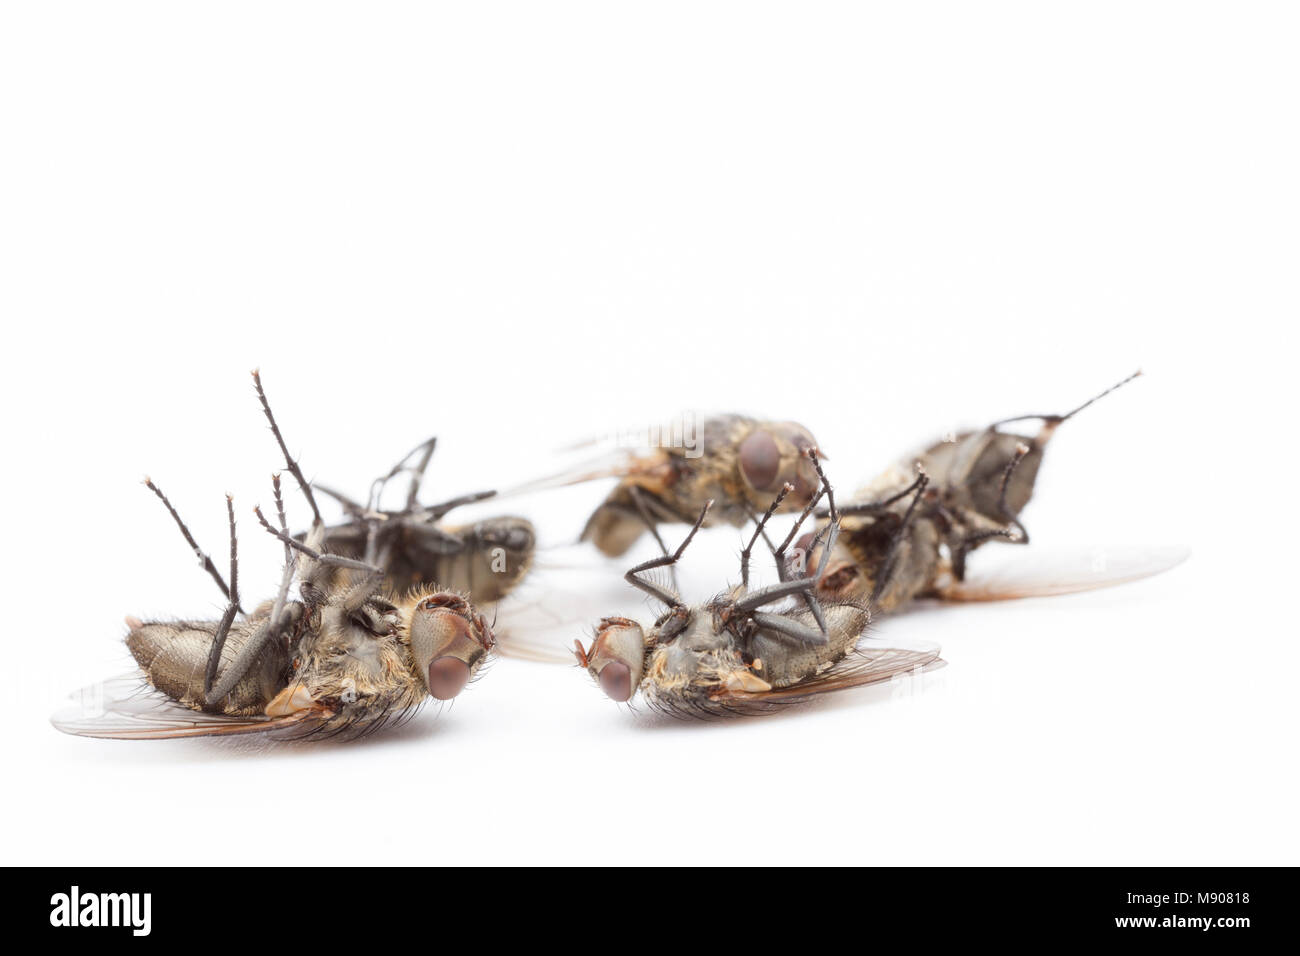 Dead cluster flies, Pollenia rudis,on a white background. These flies can infest homes in large numbers. England UK GB Stock Photo